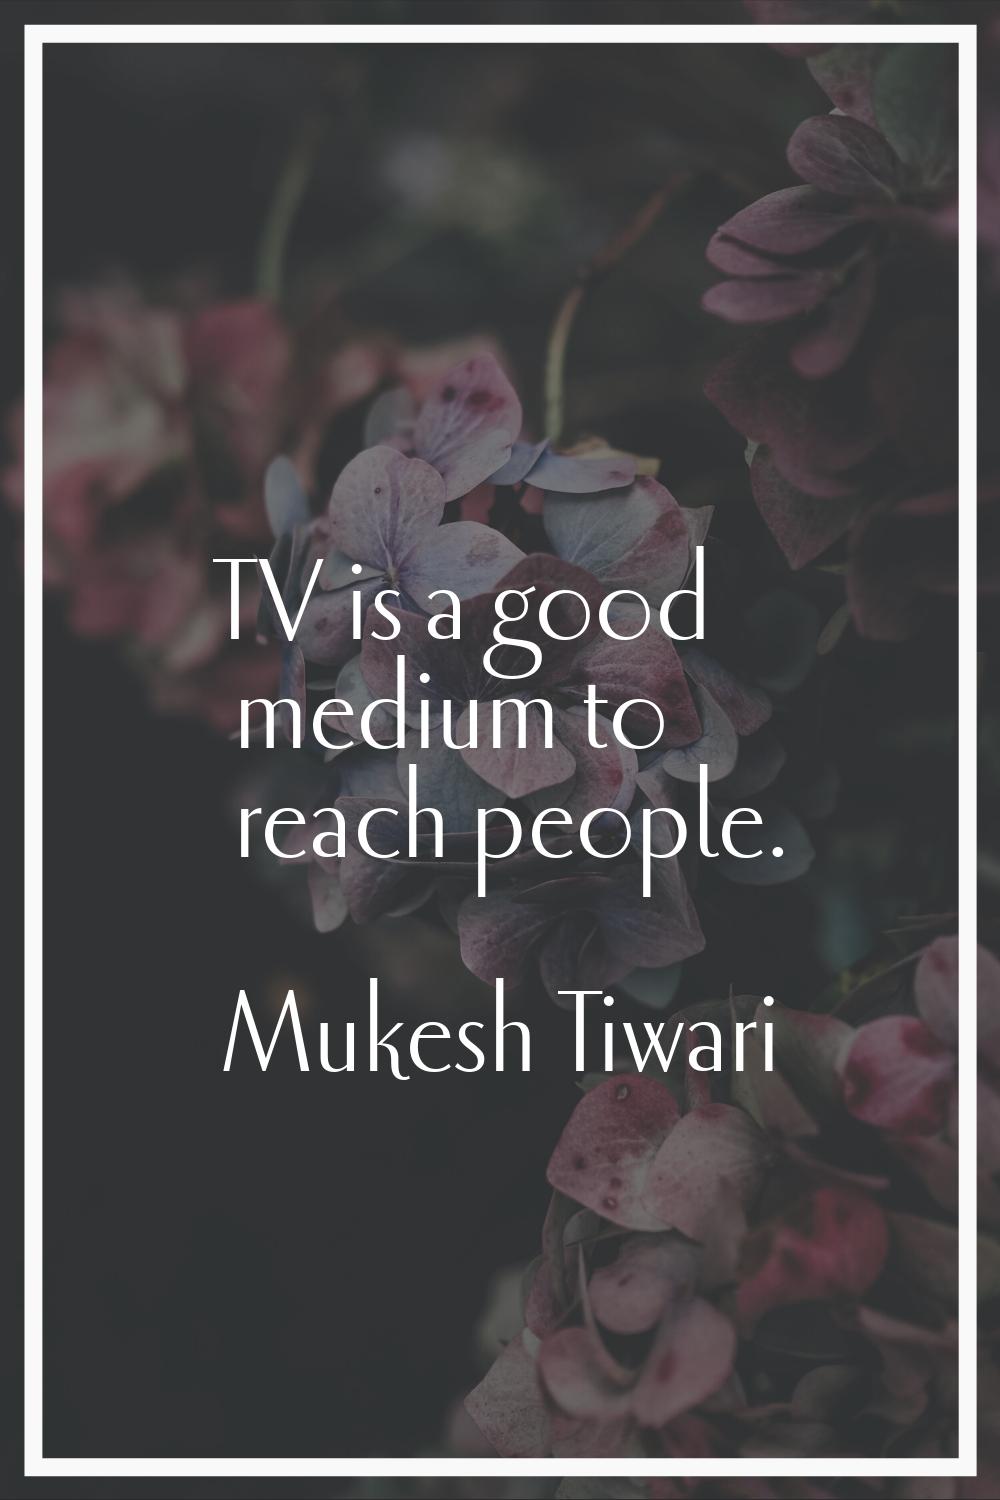 TV is a good medium to reach people.